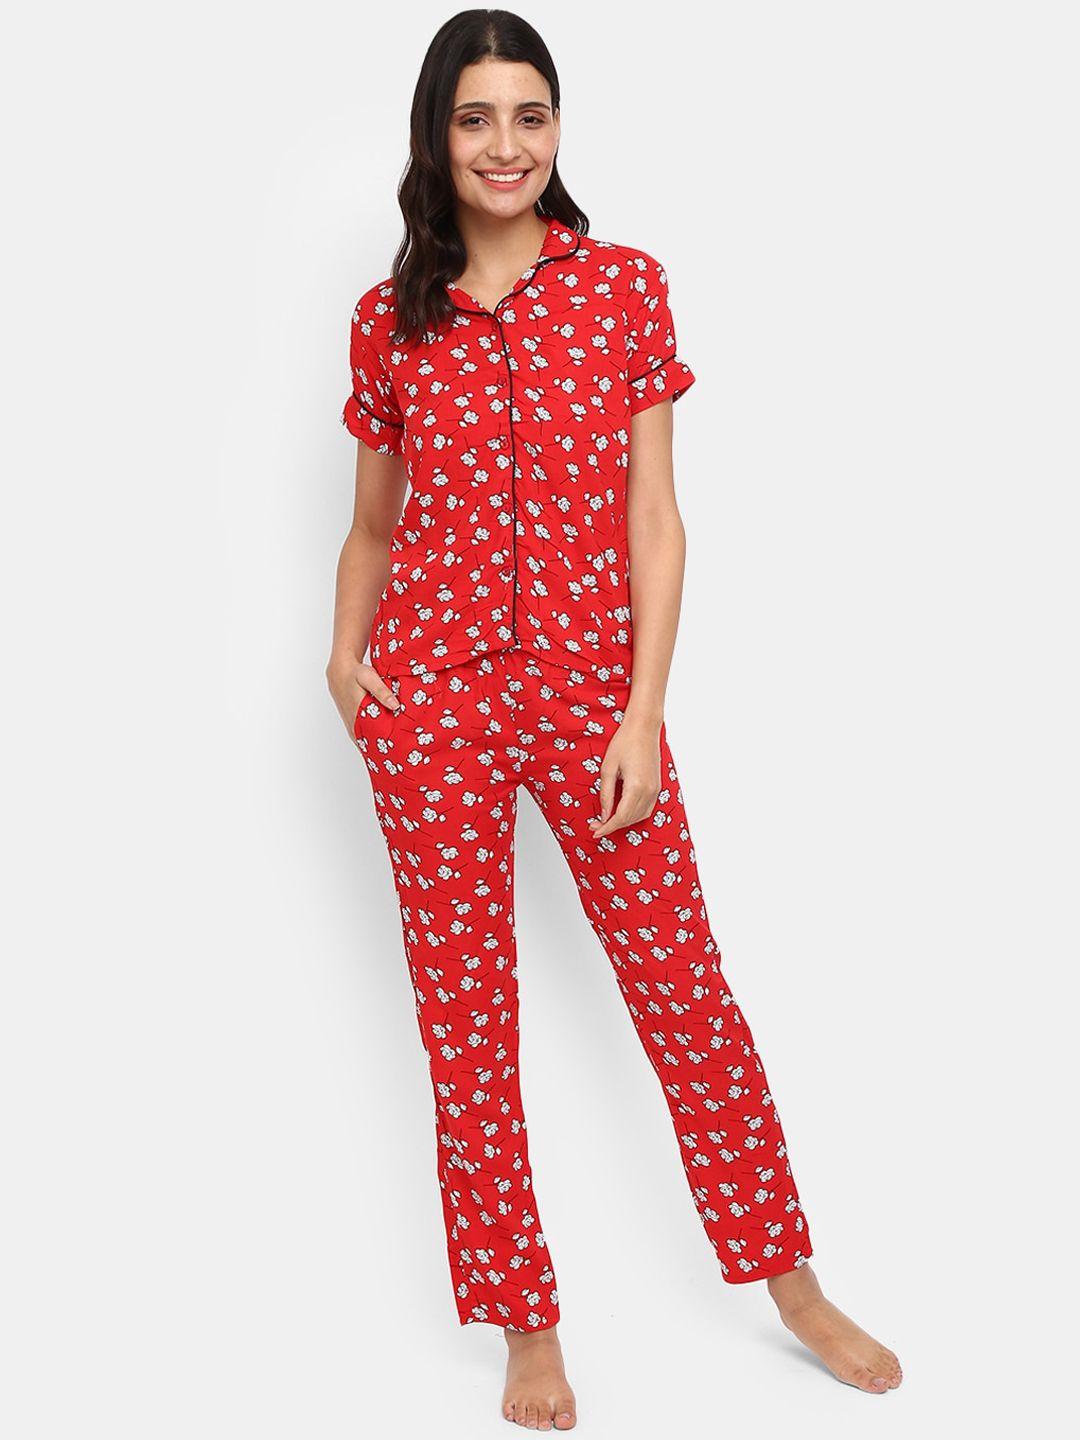 v-mart women red & white printed night suit